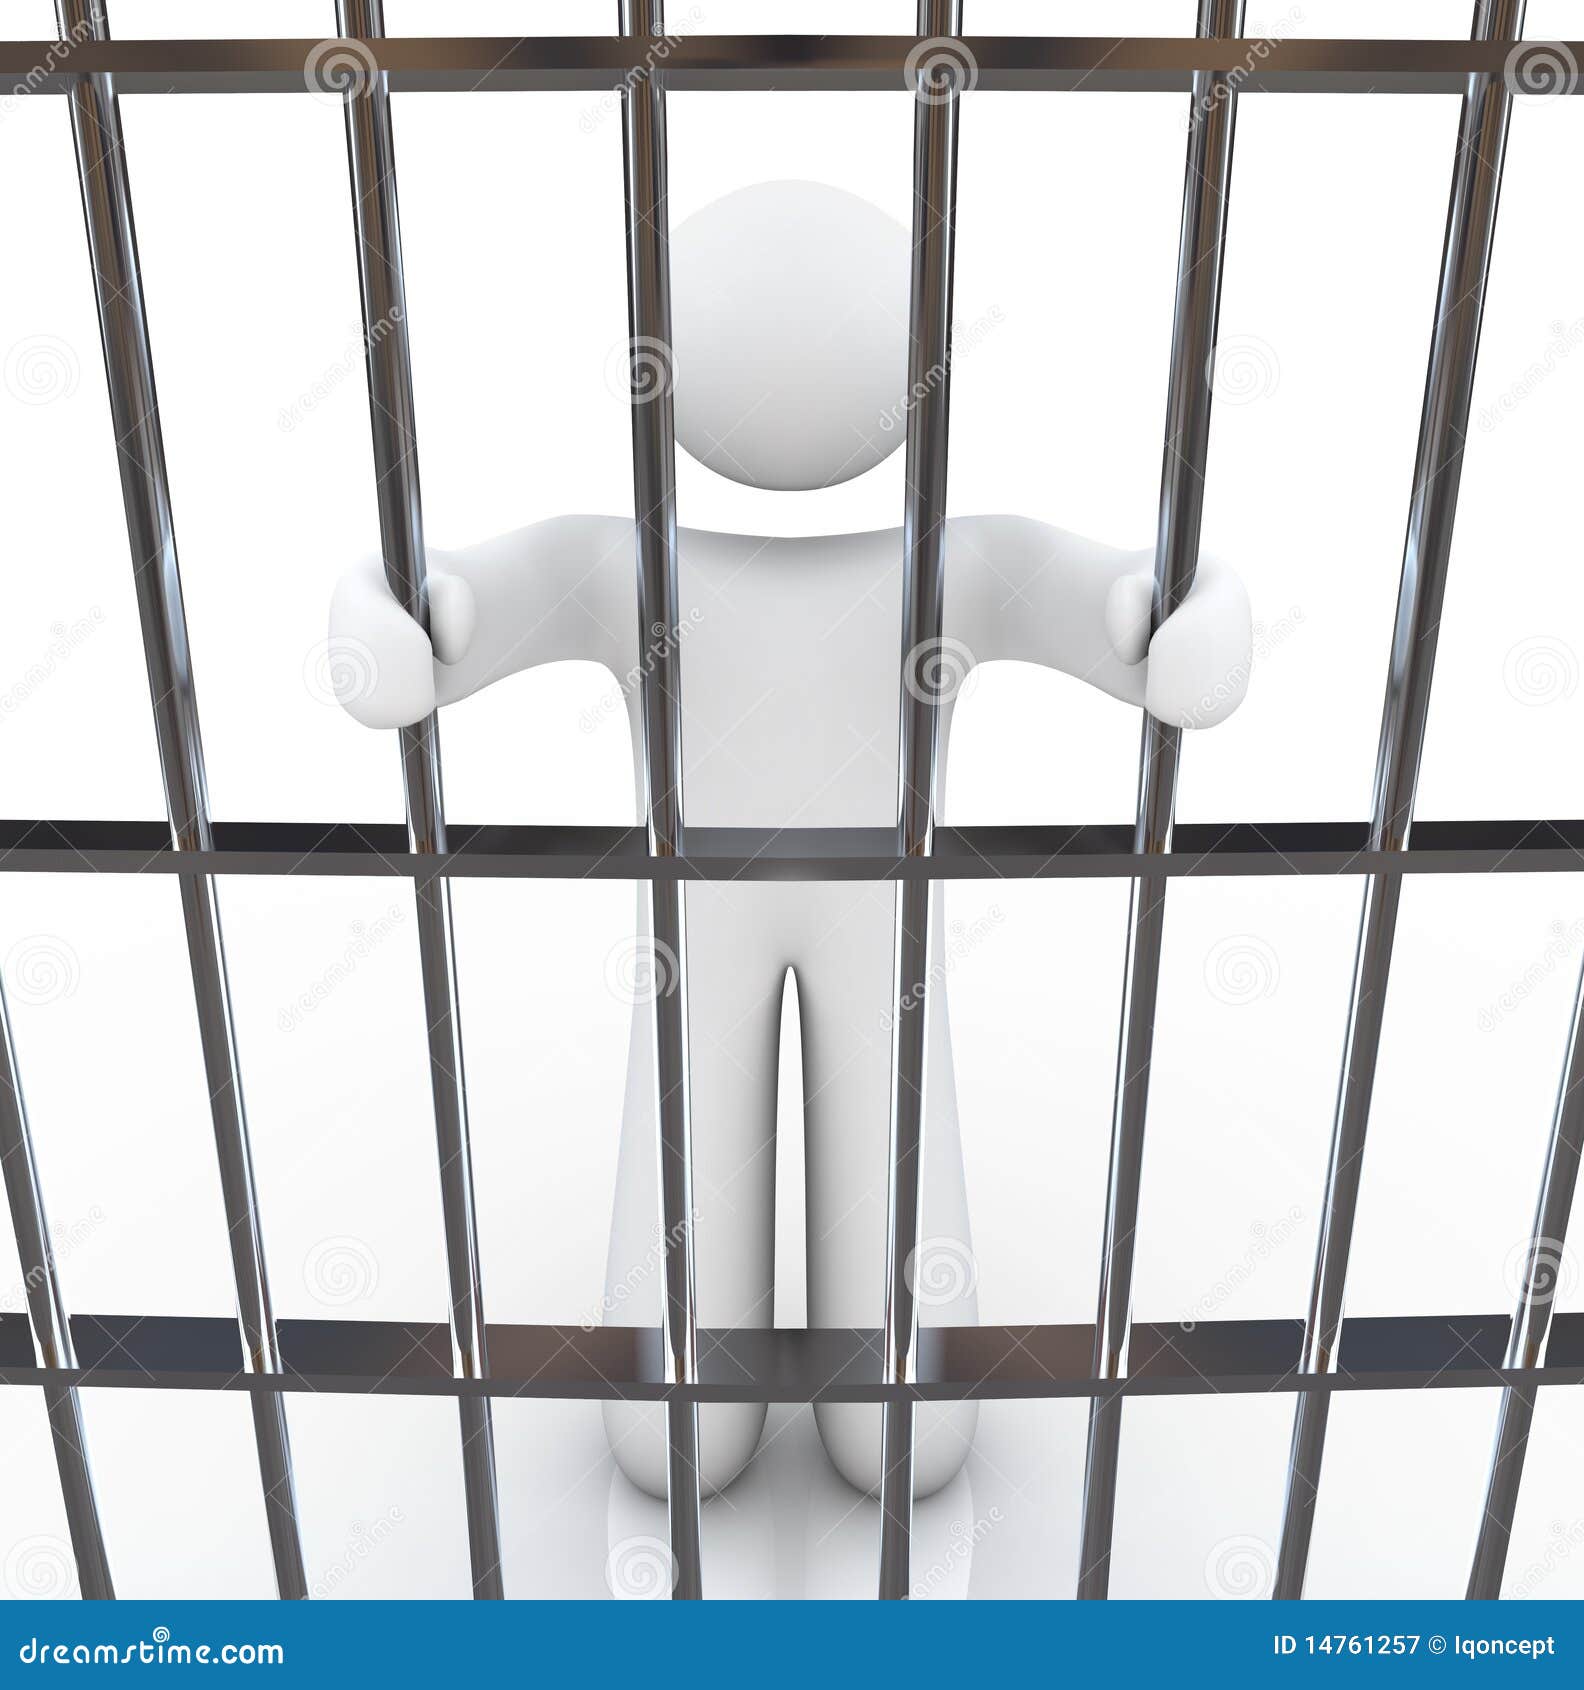 free clipart images jail - photo #42